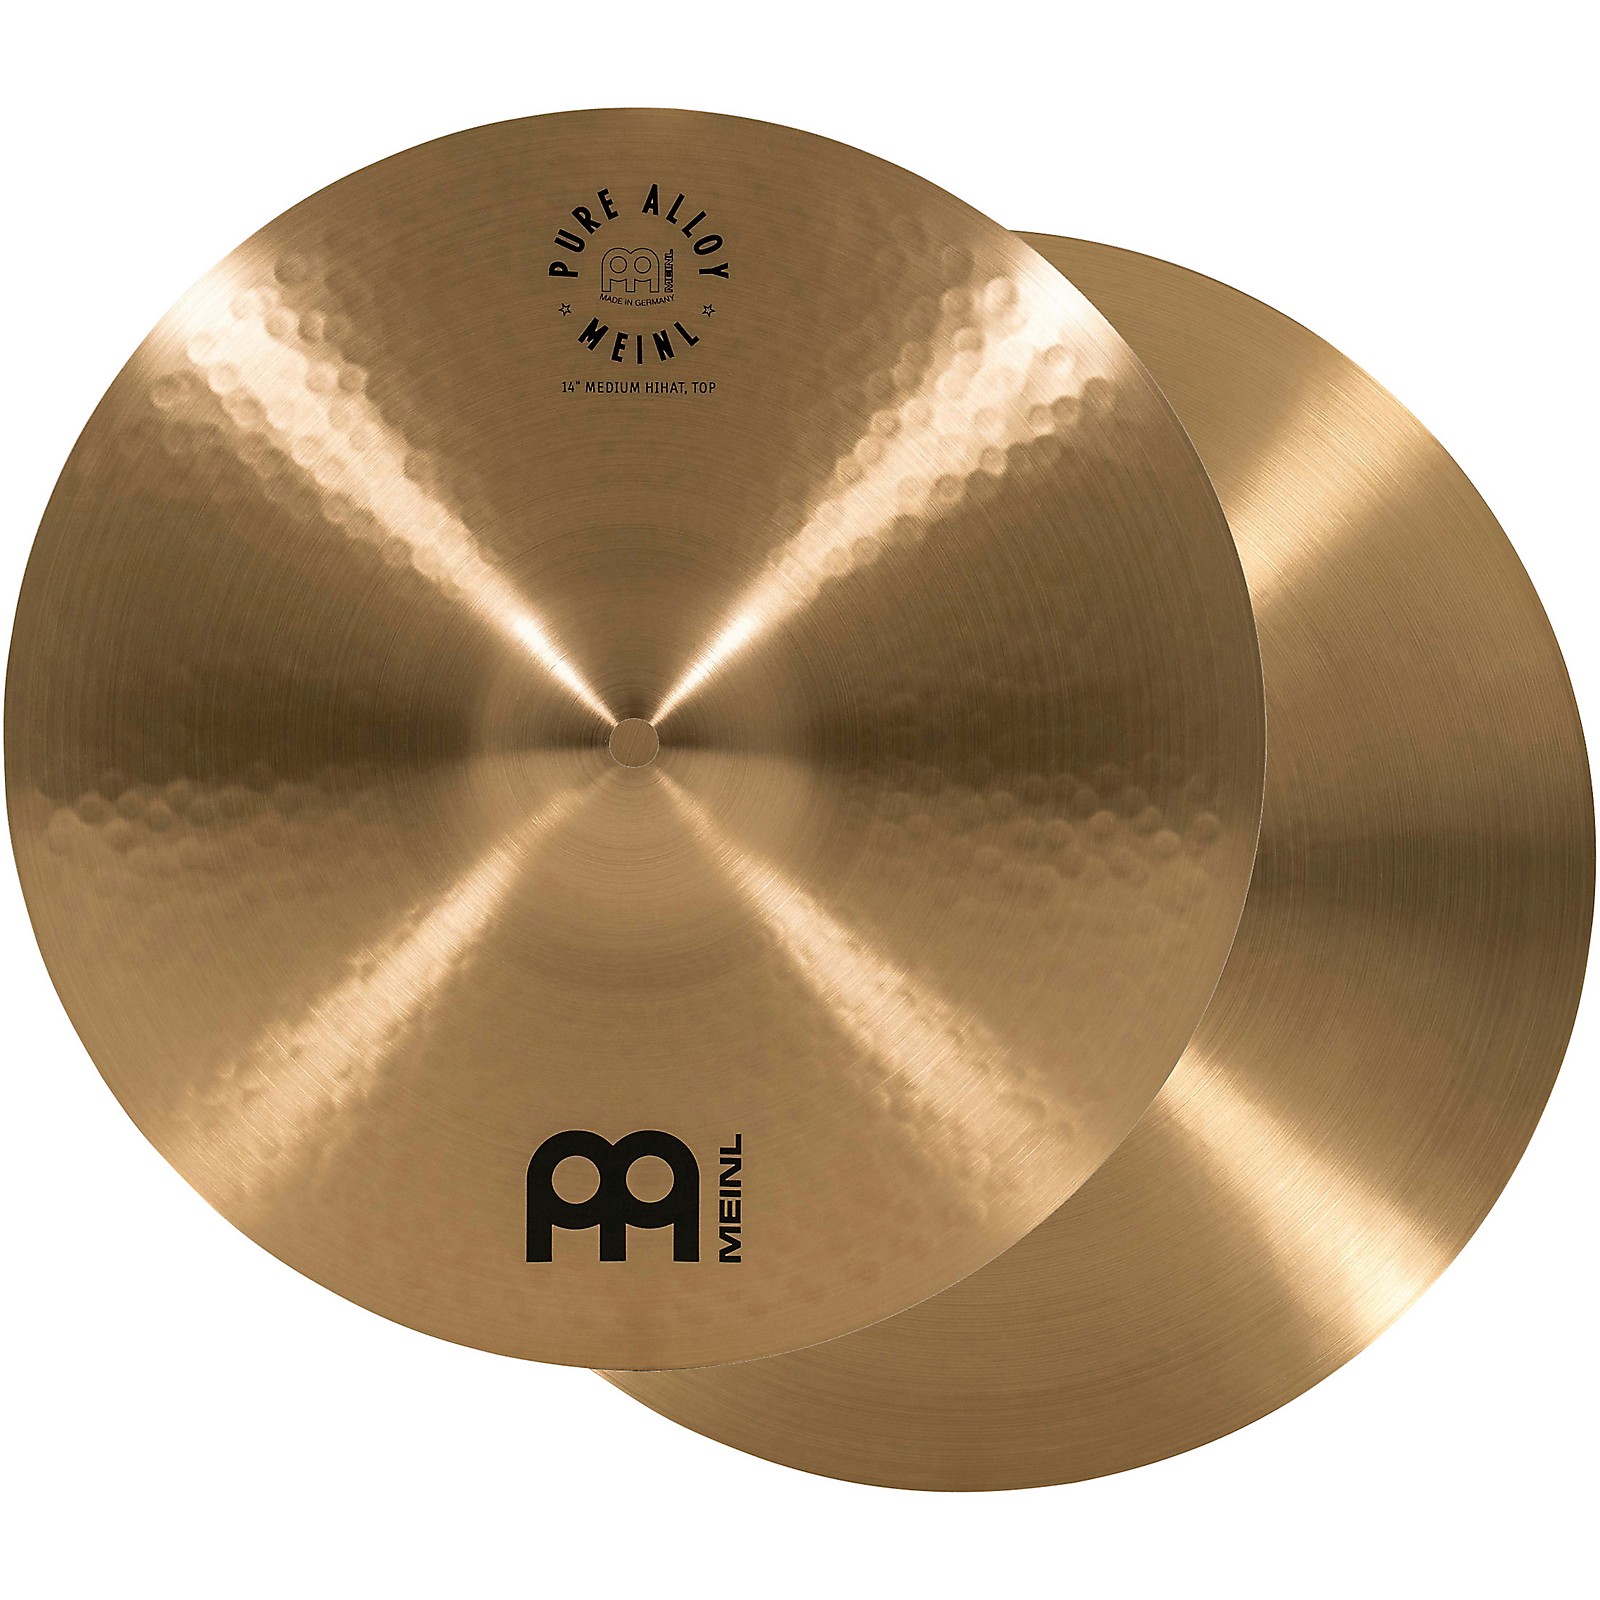 MEINL Pure Alloy Traditional Medium Hi-Hat Cymbal Pair 14 in 